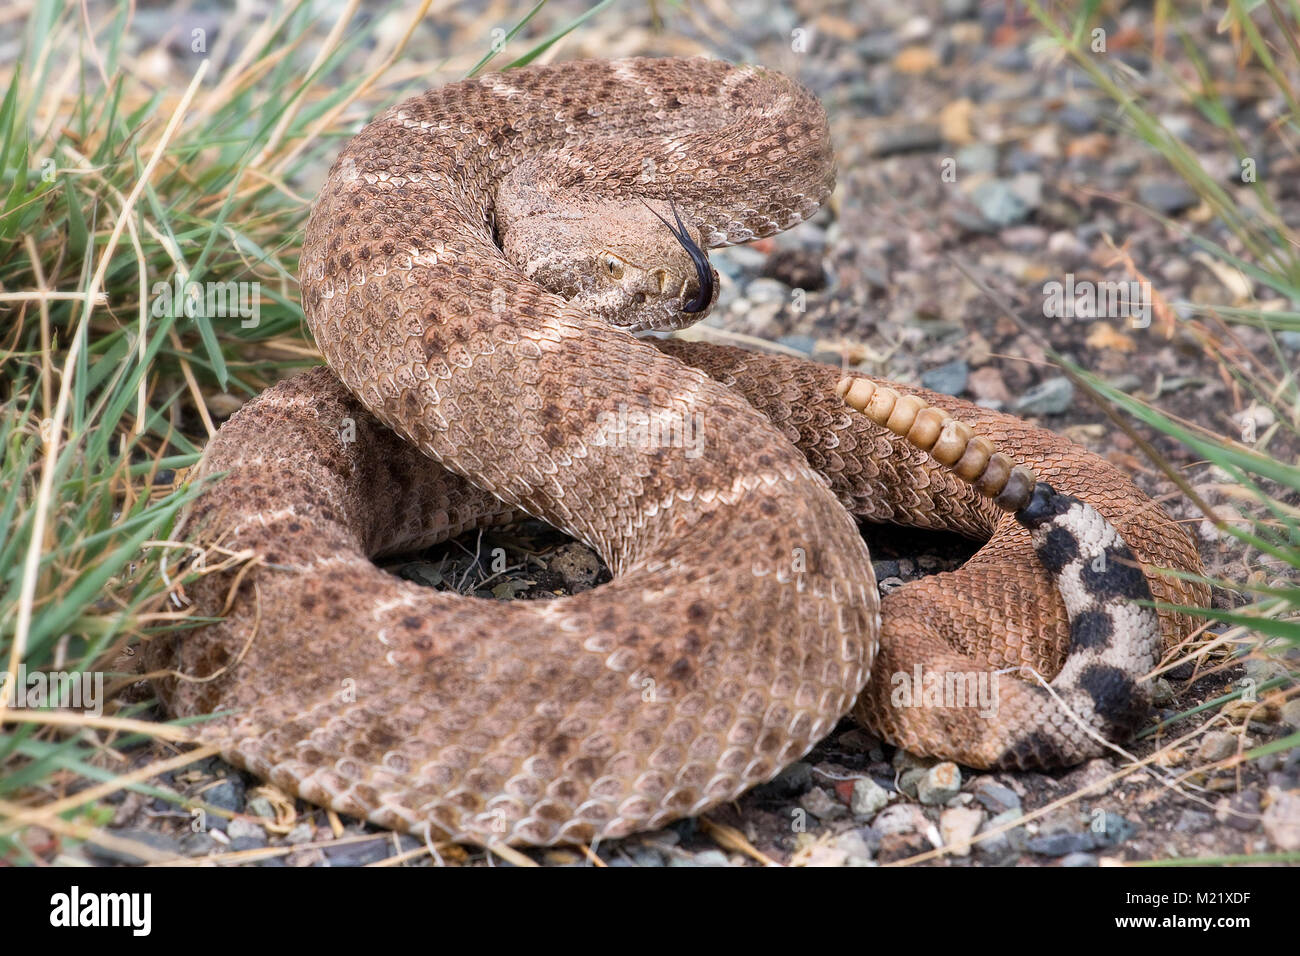 The western diamondback rattlesnake or Texas diamond-back(Crotalus atrox) is a venomous rattlesnake species in United States and Mexico. It is responsible for the majority of snakebite fatalities. Stock Photo